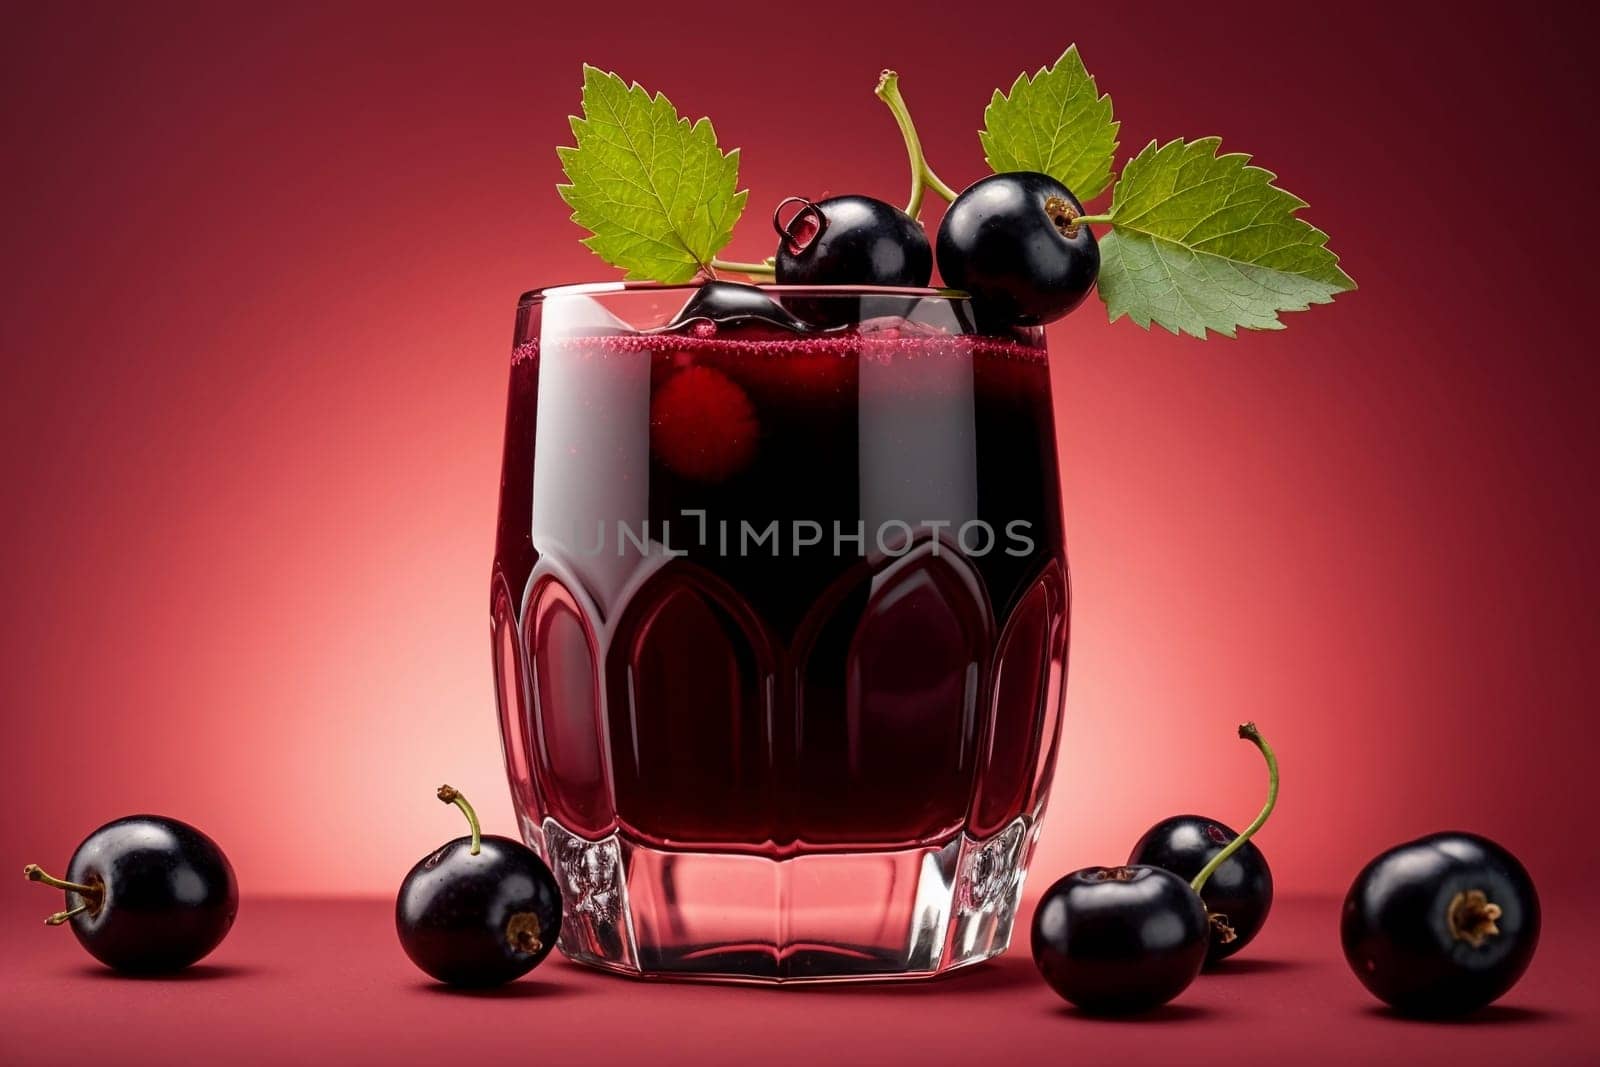 black currant compote in a glass isolated on a red background .